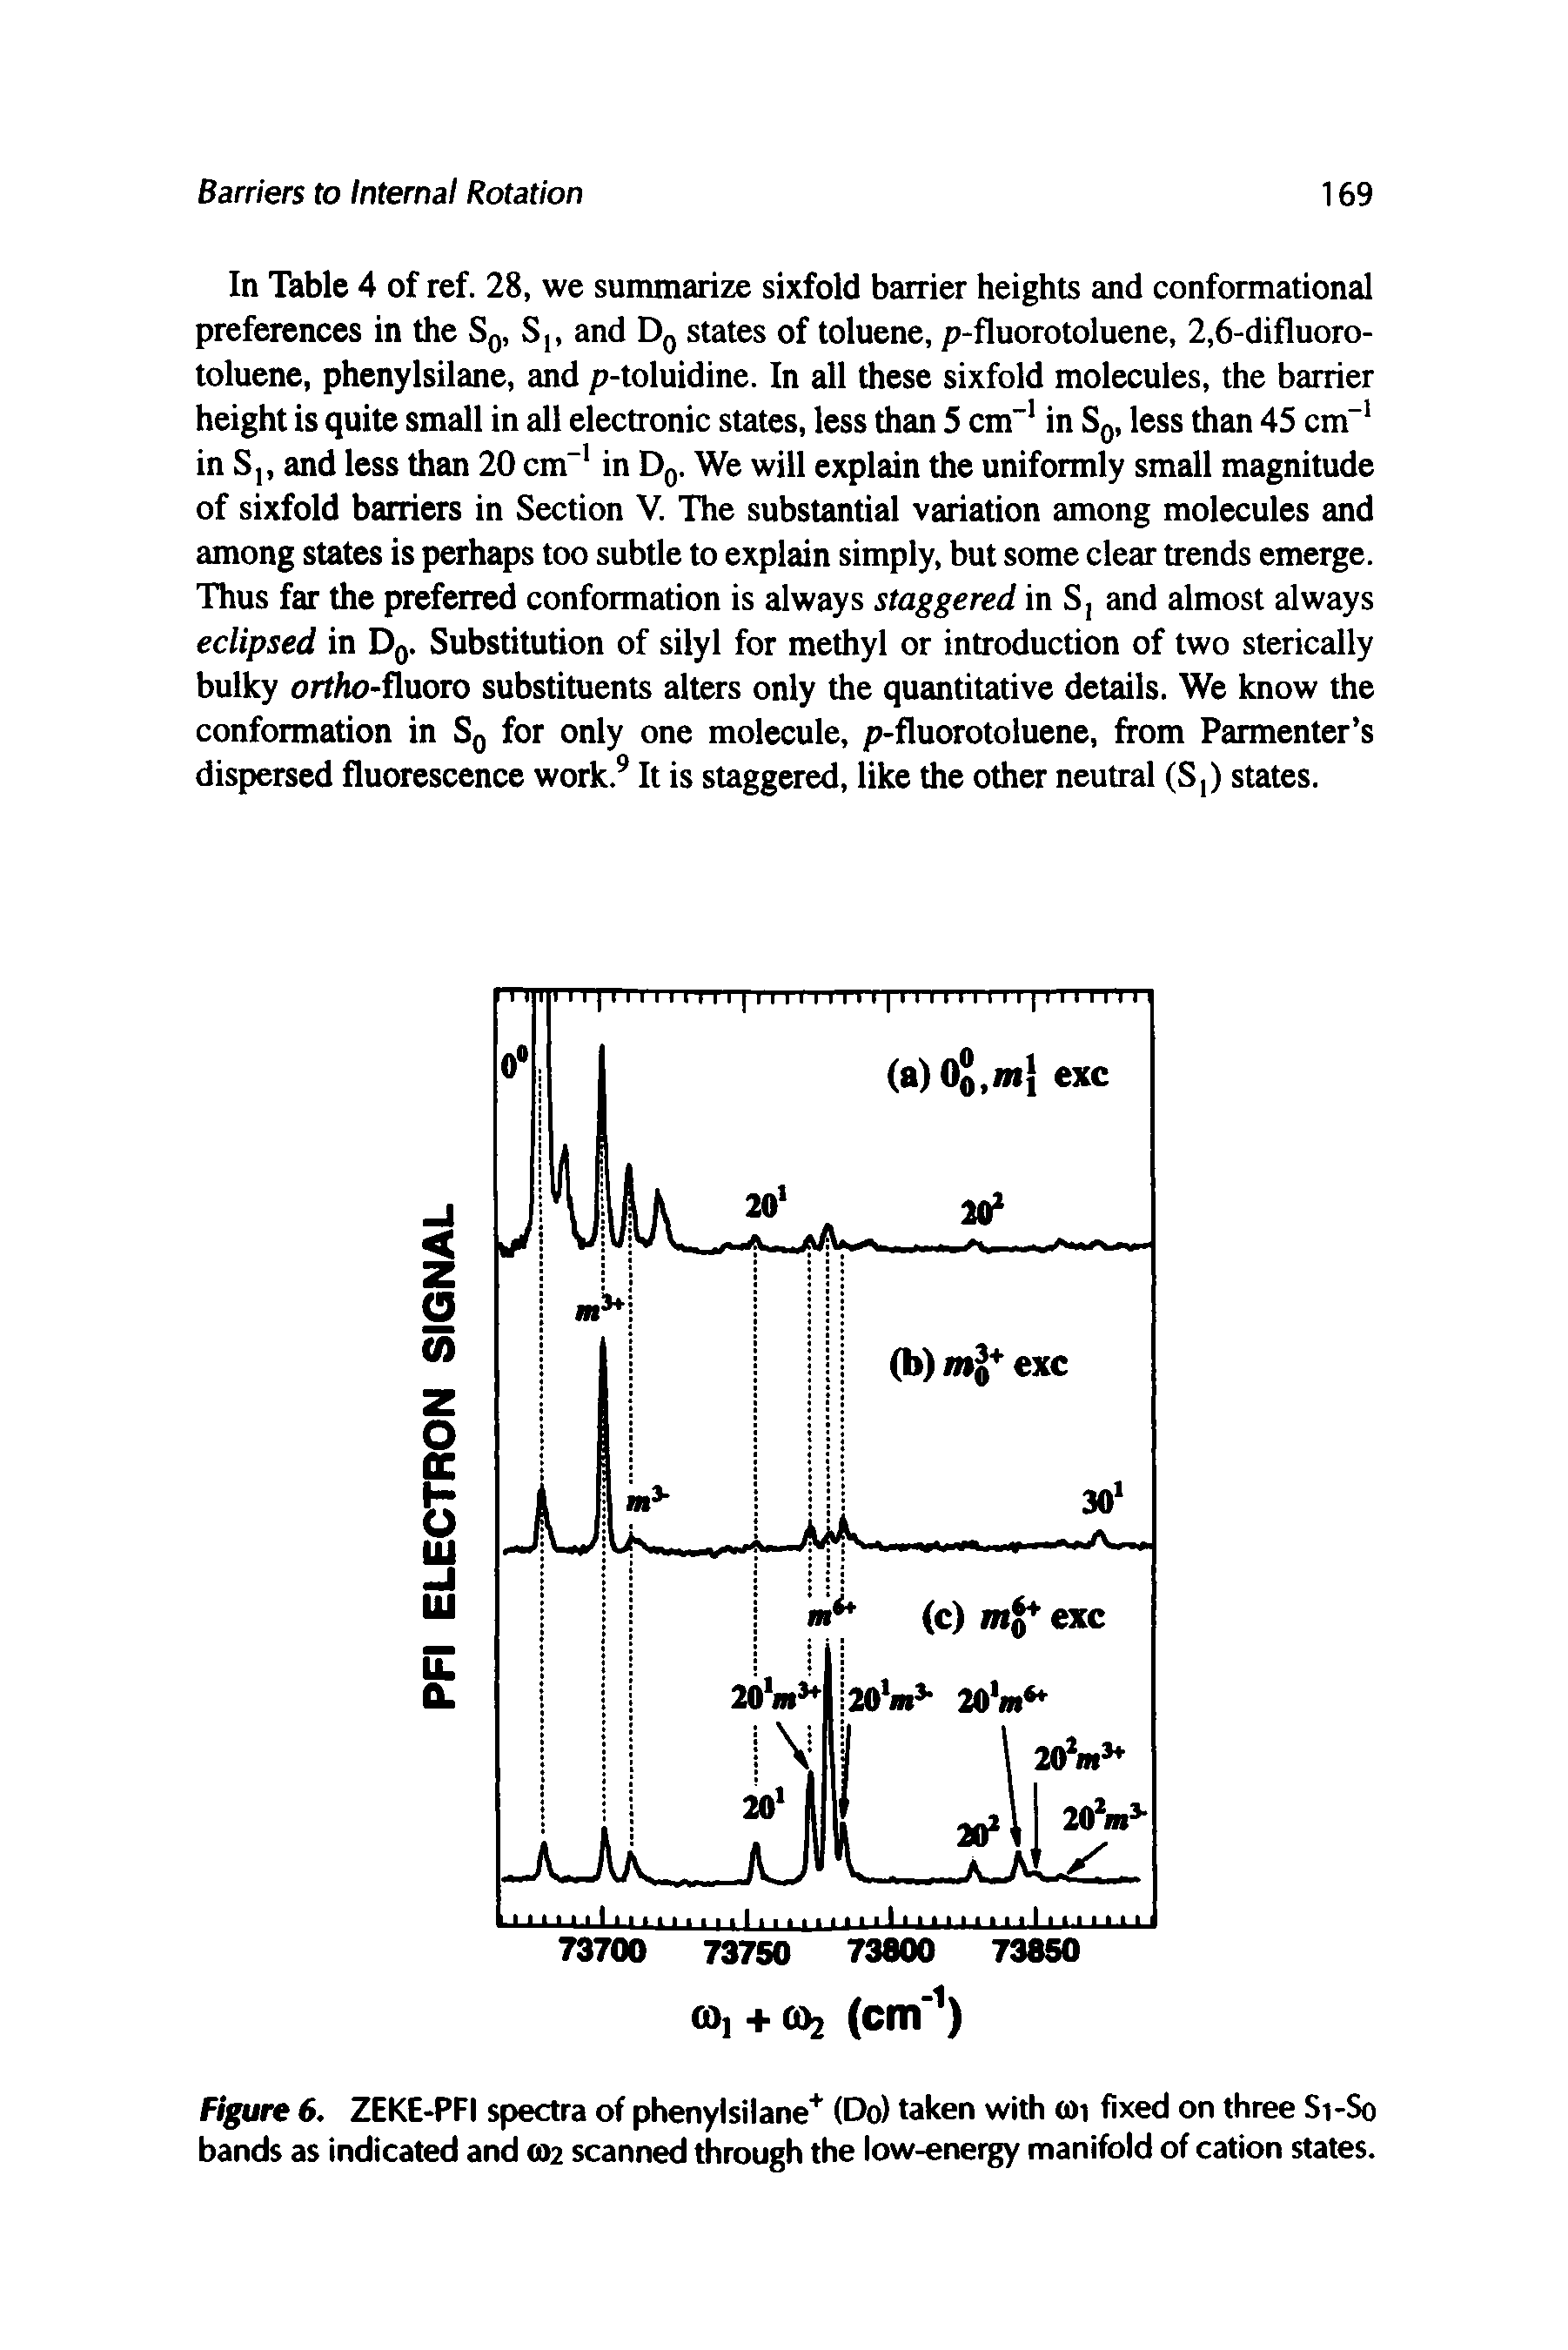 Figure 6. ZEKE-PFI spectra of phenylsilane (Do) taken with (Oi fixed on three S1-S0 bands as indicated and 2 scanned through the low-energy manifold of cation states.